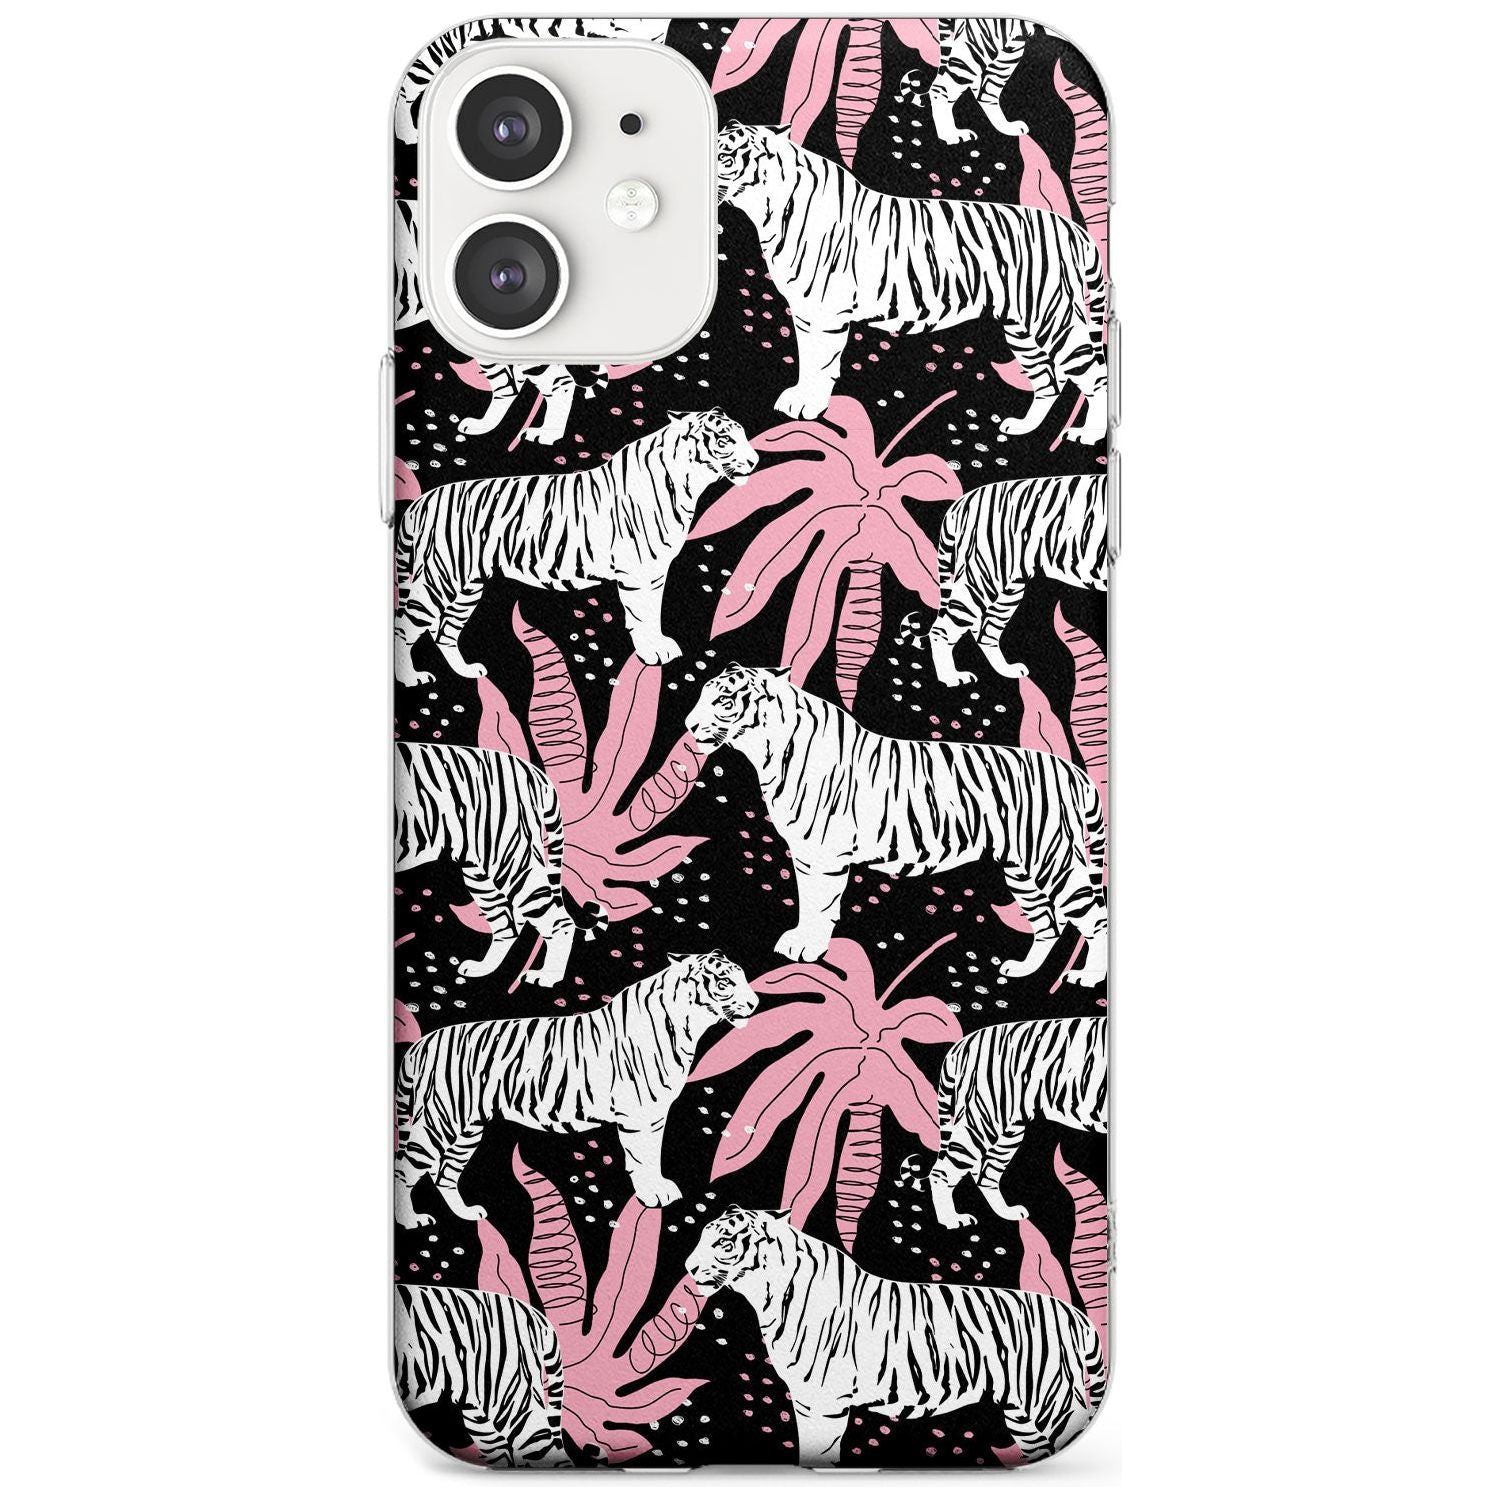 White Tigers on Black Pattern Slim TPU Phone Case for iPhone 11